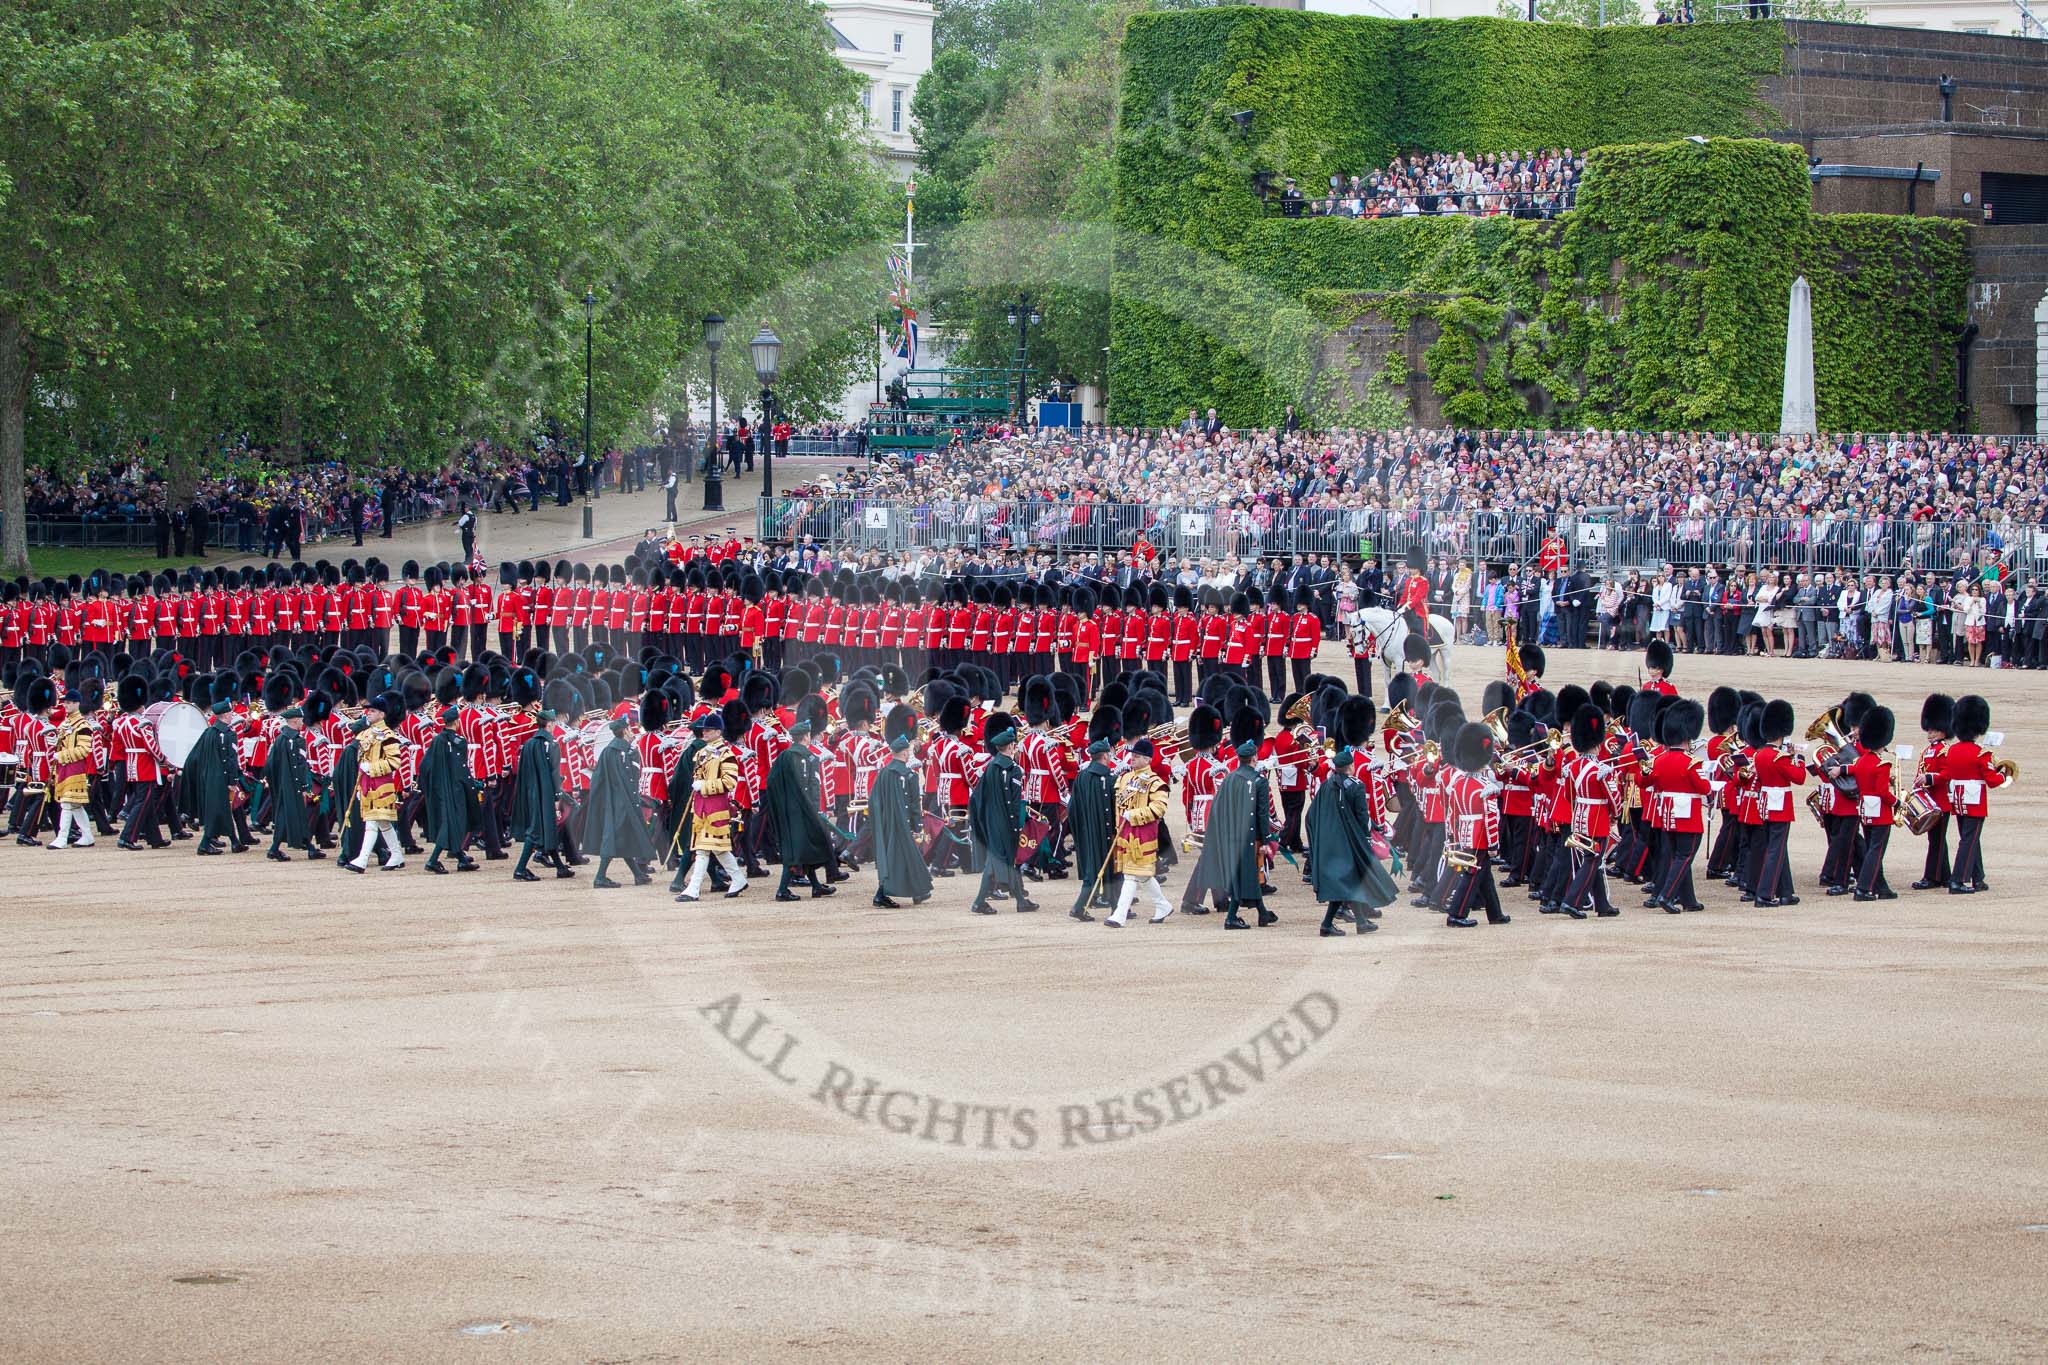 Trooping the Colour 2012: The Massed Bands Troop begins..
Horse Guards Parade, Westminster,
London SW1,

United Kingdom,
on 16 June 2012 at 11:11, image #267